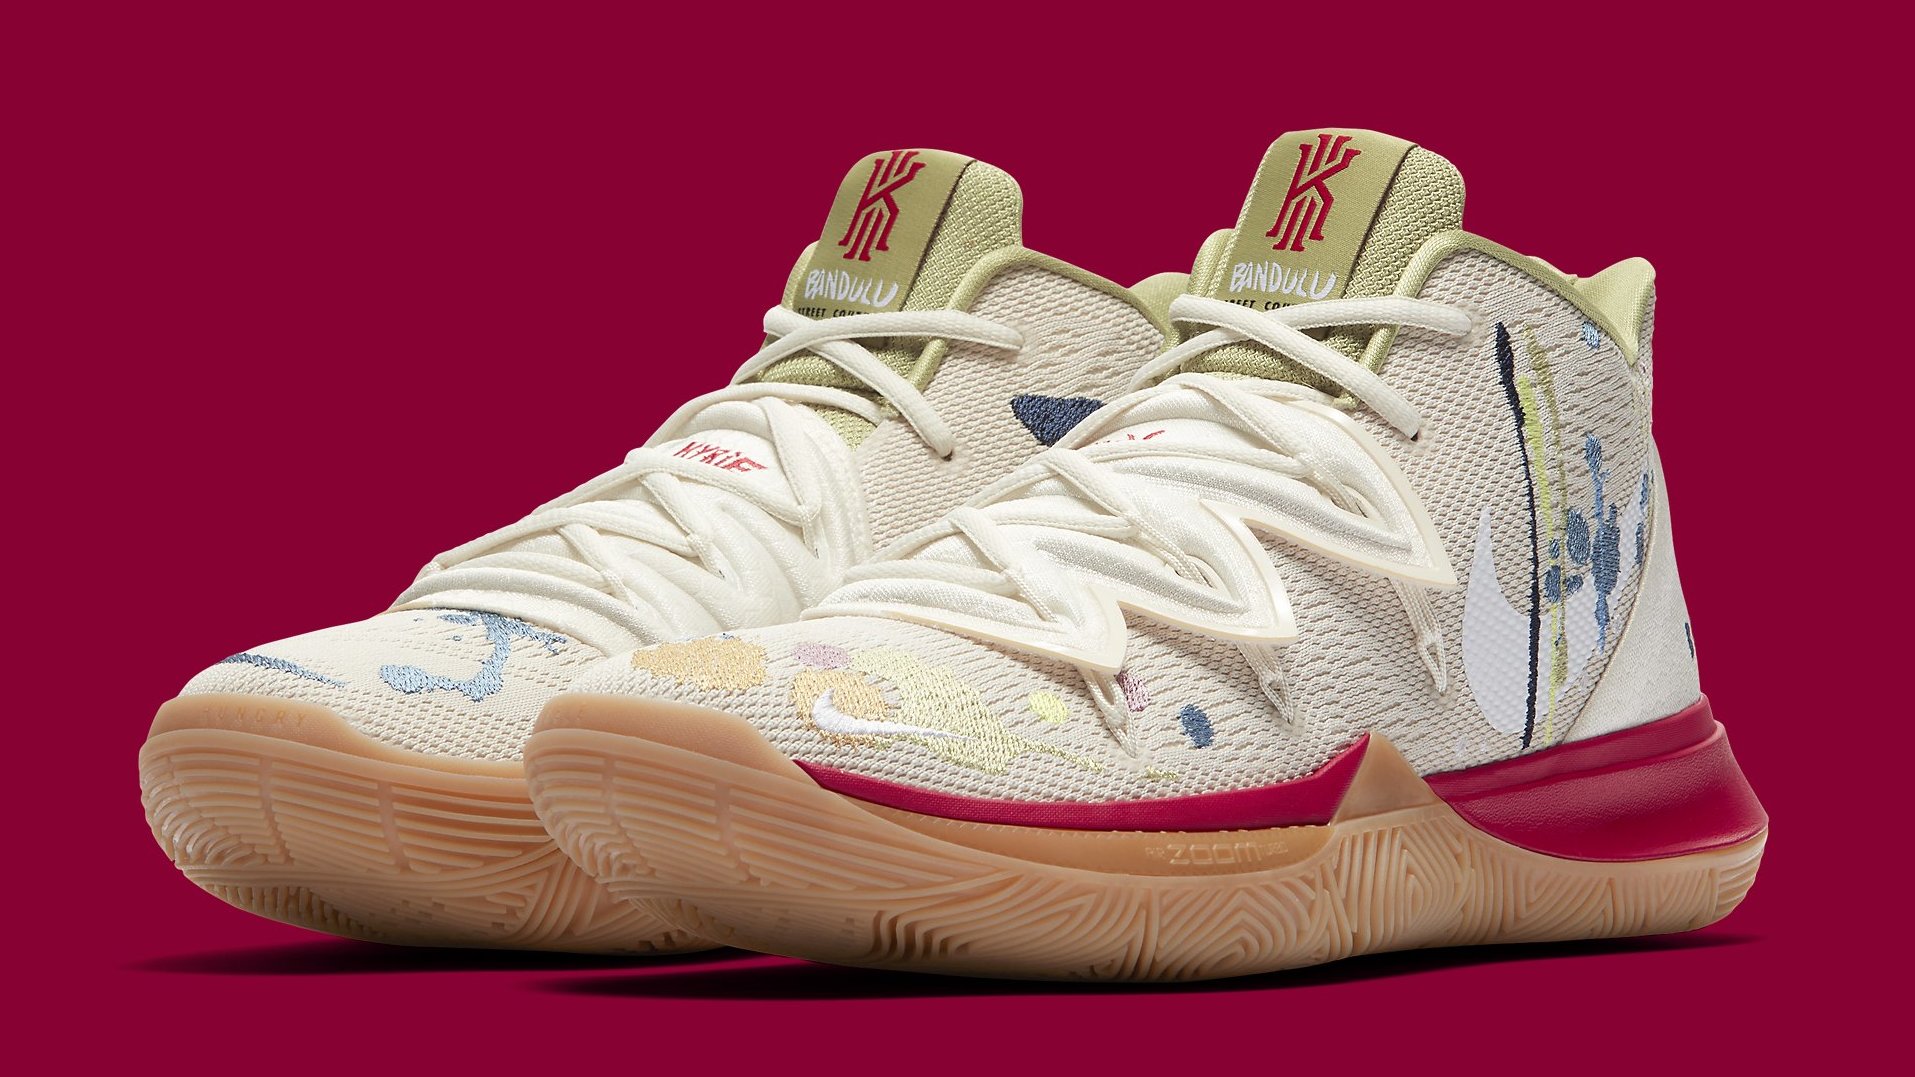 kyrie 5 embroidered splatters